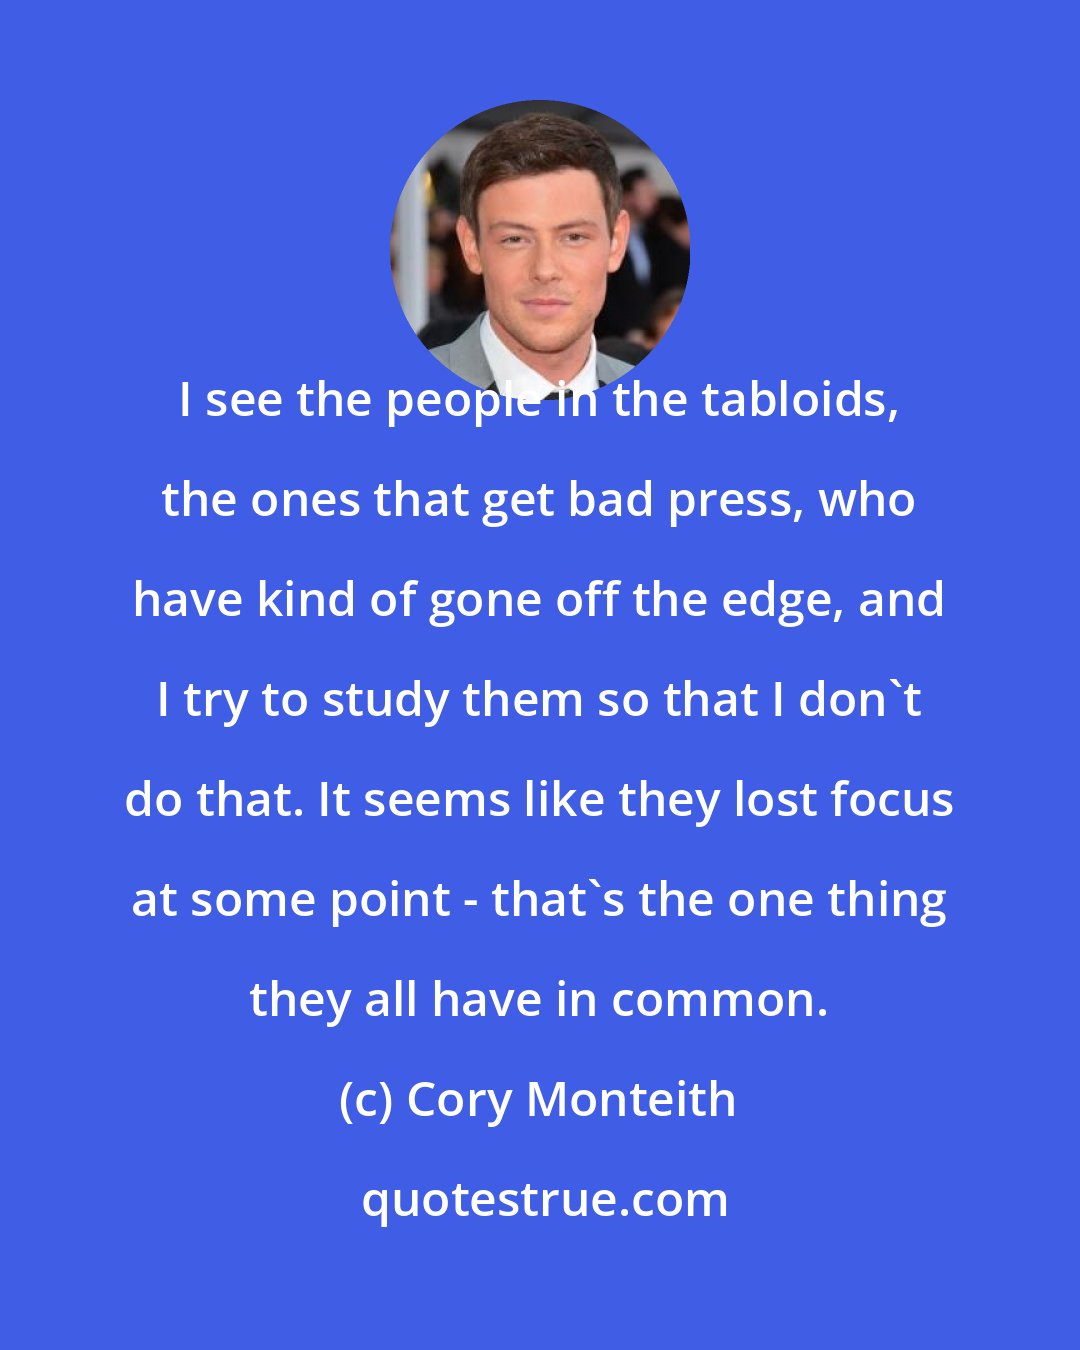 Cory Monteith: I see the people in the tabloids, the ones that get bad press, who have kind of gone off the edge, and I try to study them so that I don't do that. It seems like they lost focus at some point - that's the one thing they all have in common.